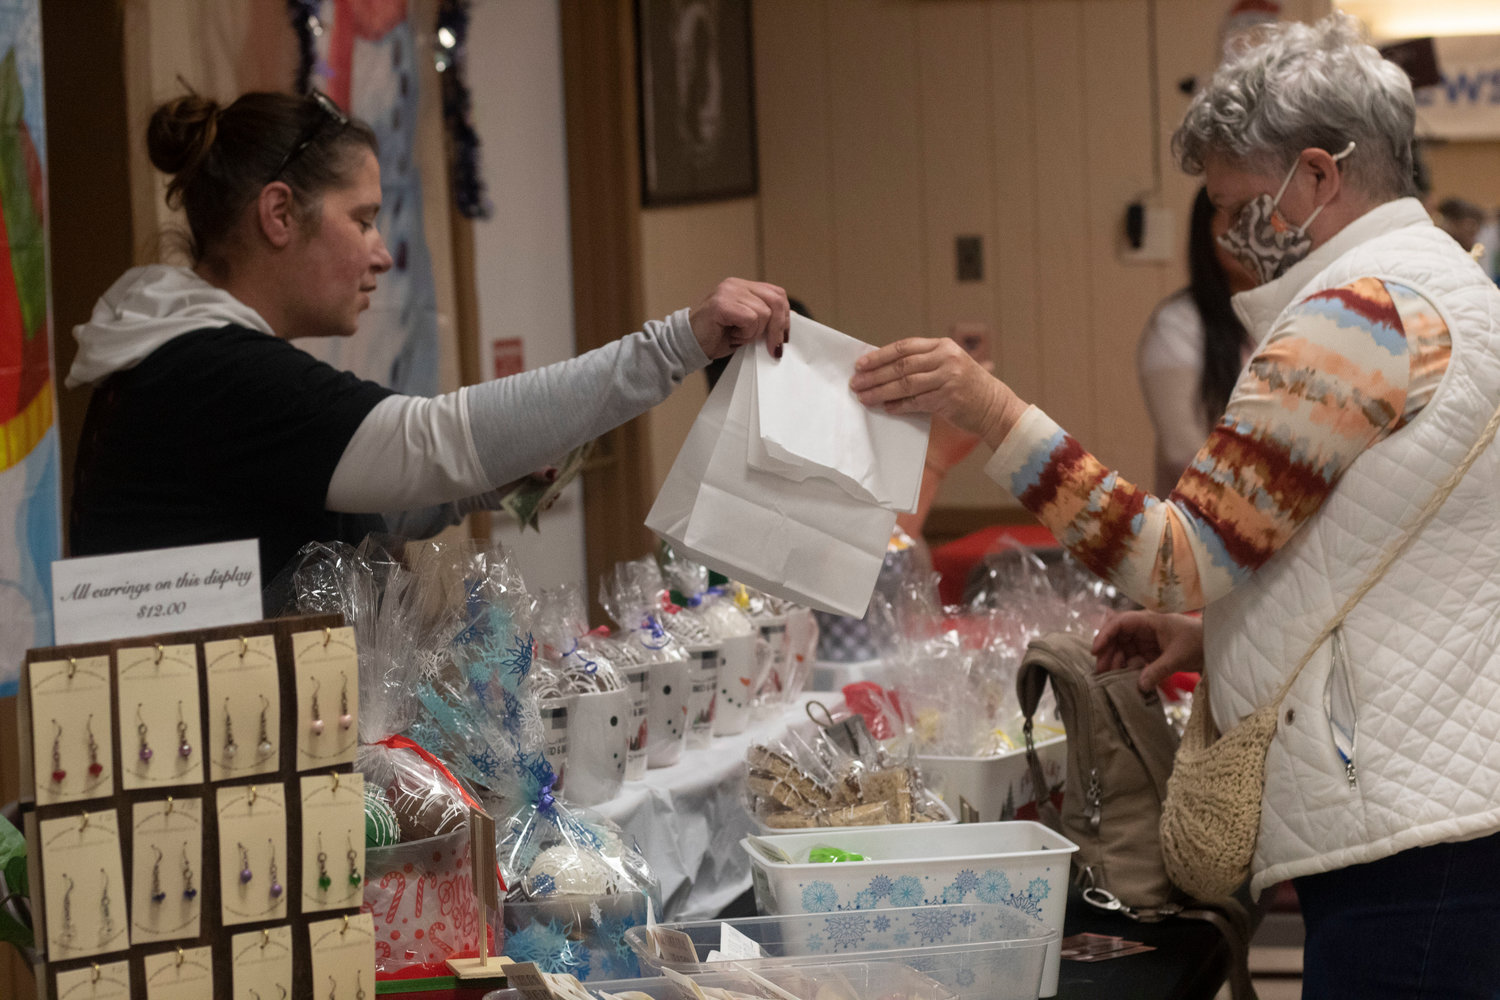 Louann Sherbach of Amityville (right) going home with a one-of-a-kind homemade gift from Alyssa Bianco, owner of Sweets & Treats (left).